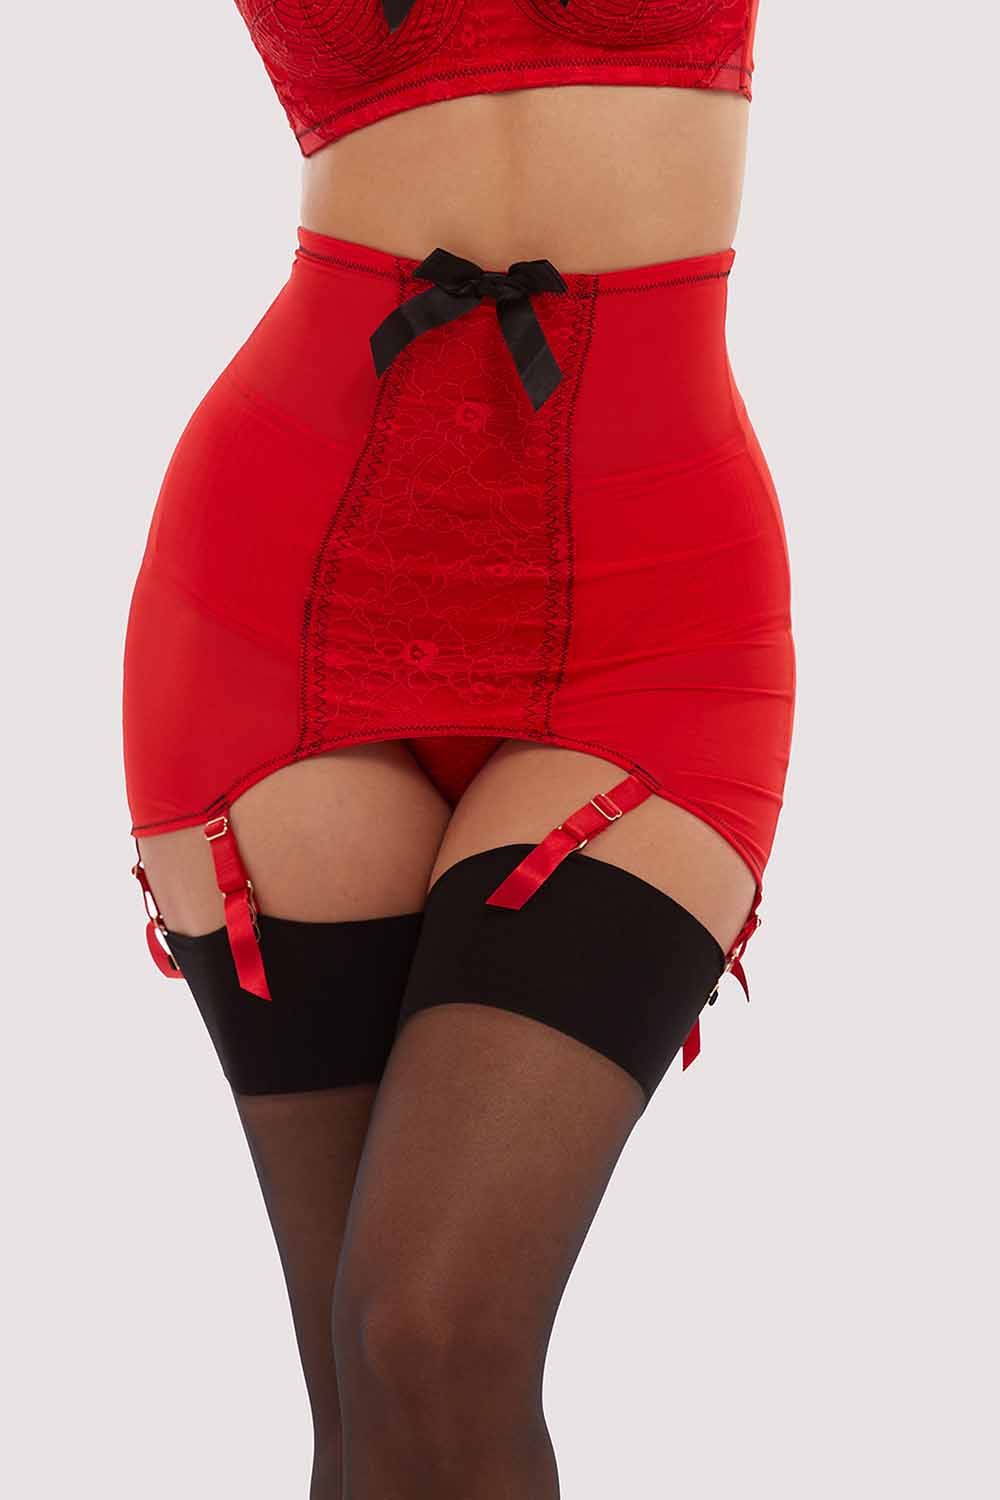 https://www.playfulpromises.com/cdn/shop/products/playful-promises-bpsb077r-bettie-page-elsie-lace-girdle-red-28967798636592_1200x.jpg?v=1634212324